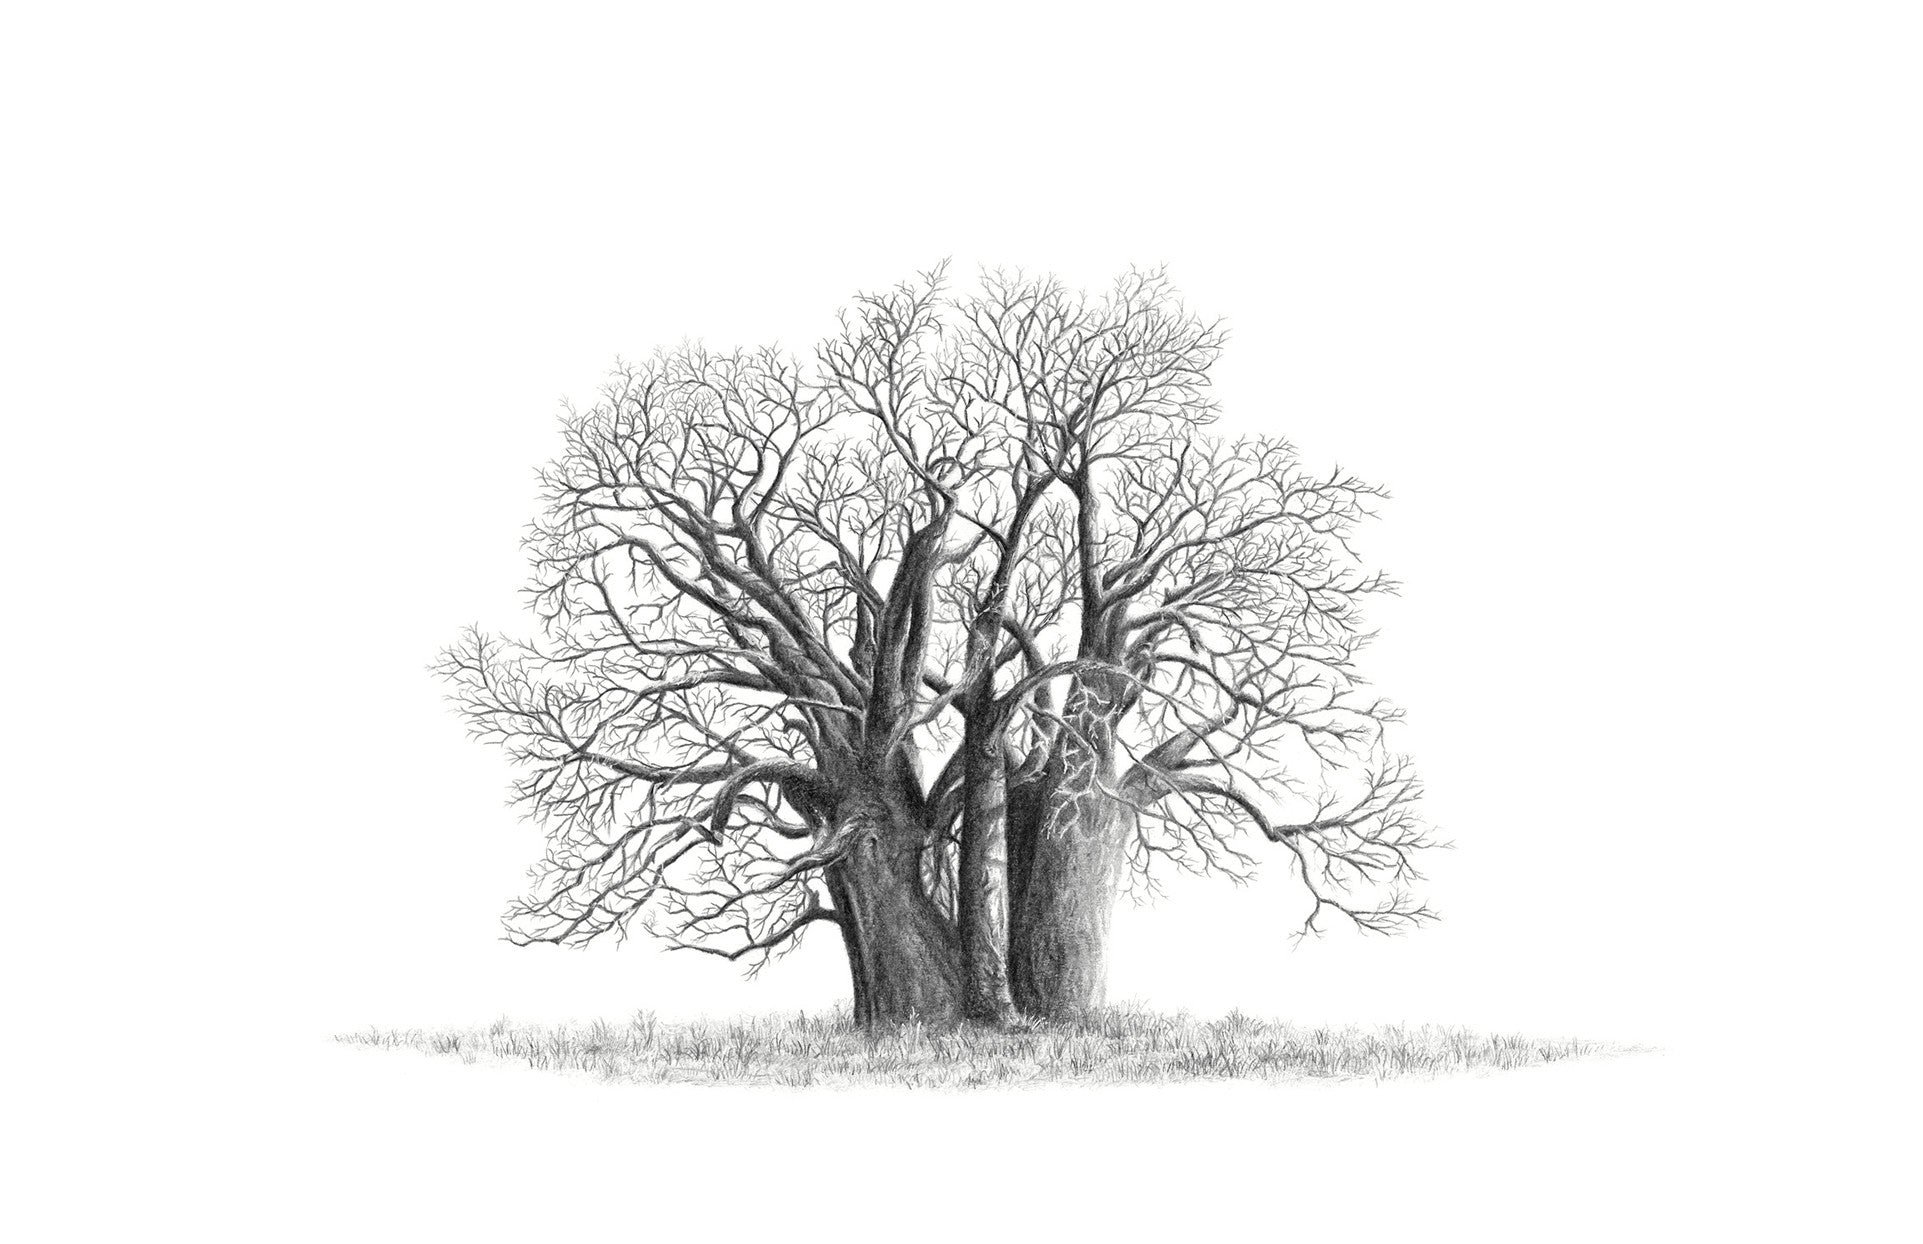 Black and white pencil drawing of an African Baobab Tree